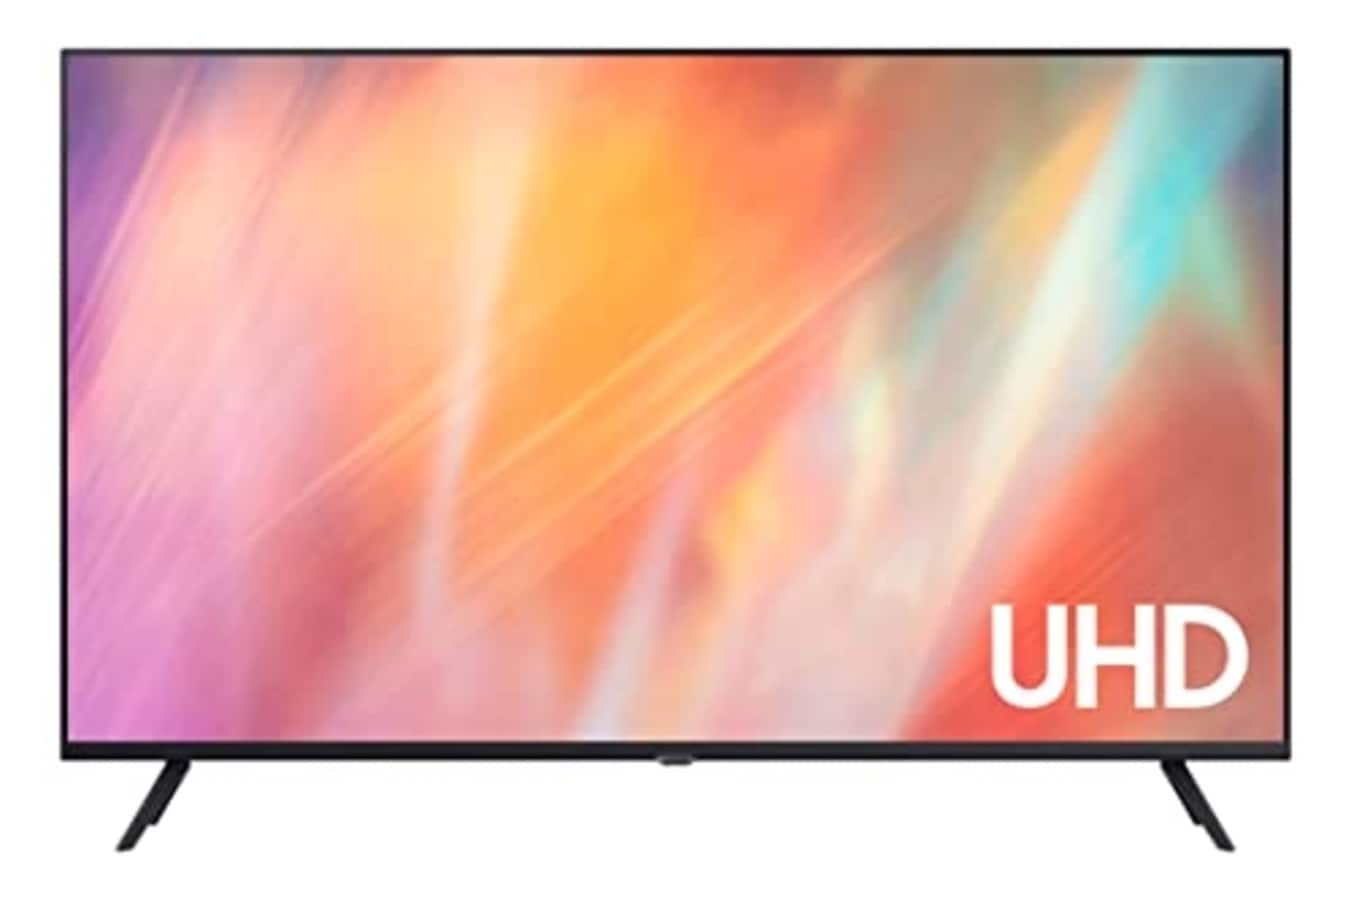 Best Samsung 55 inch TVs for ultimate entertainment experience: Top 7 picks for your living room